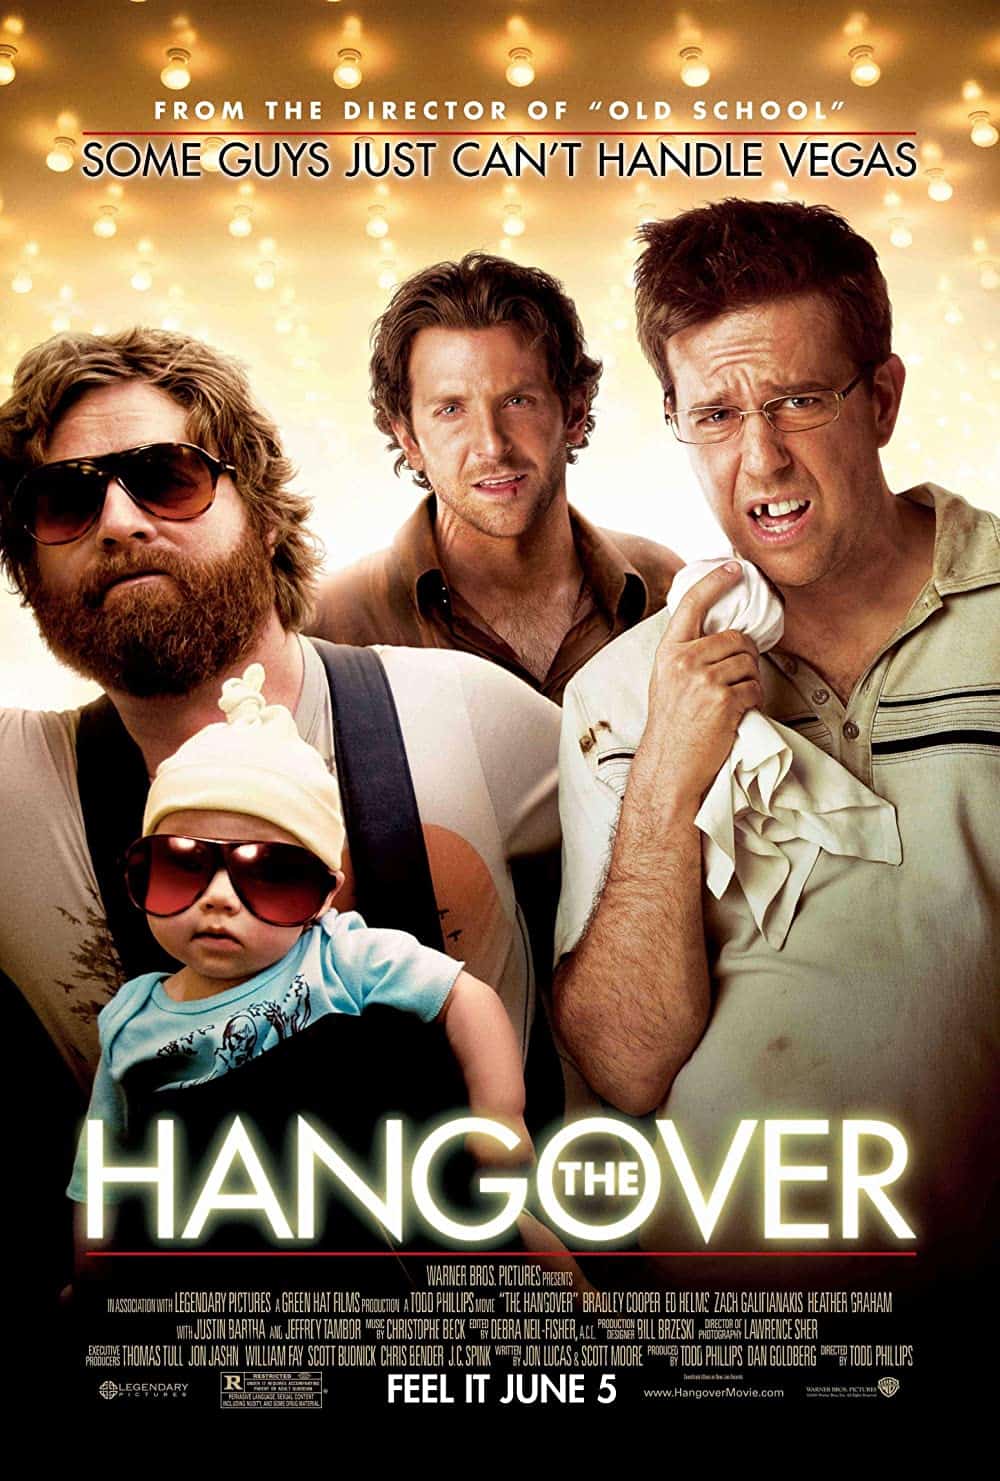 The Hangover Best Movies like Superbad